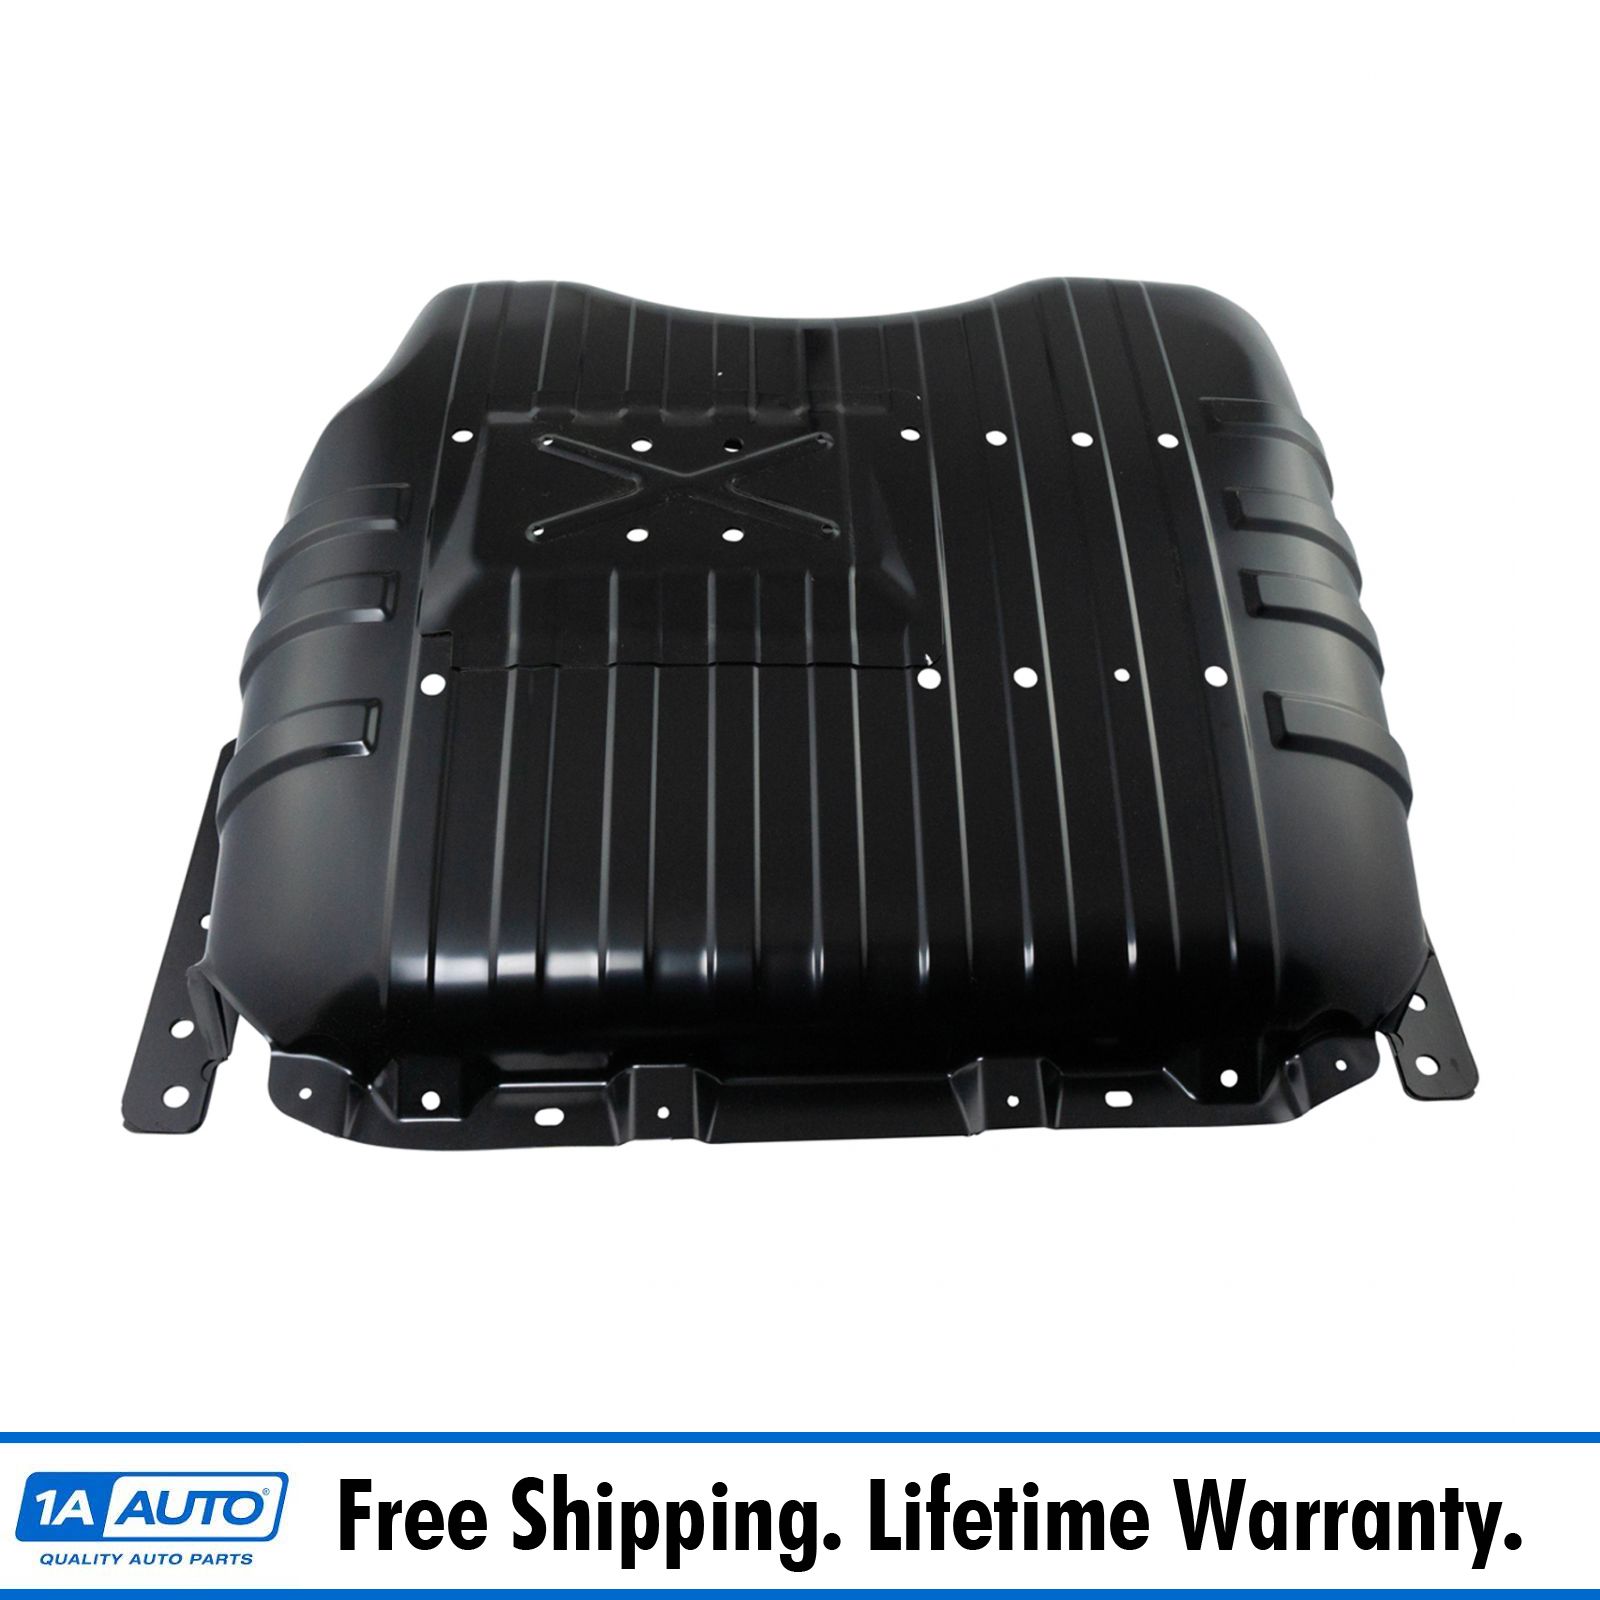 2001 grand cherokee fuel tank skid plate with free shipping